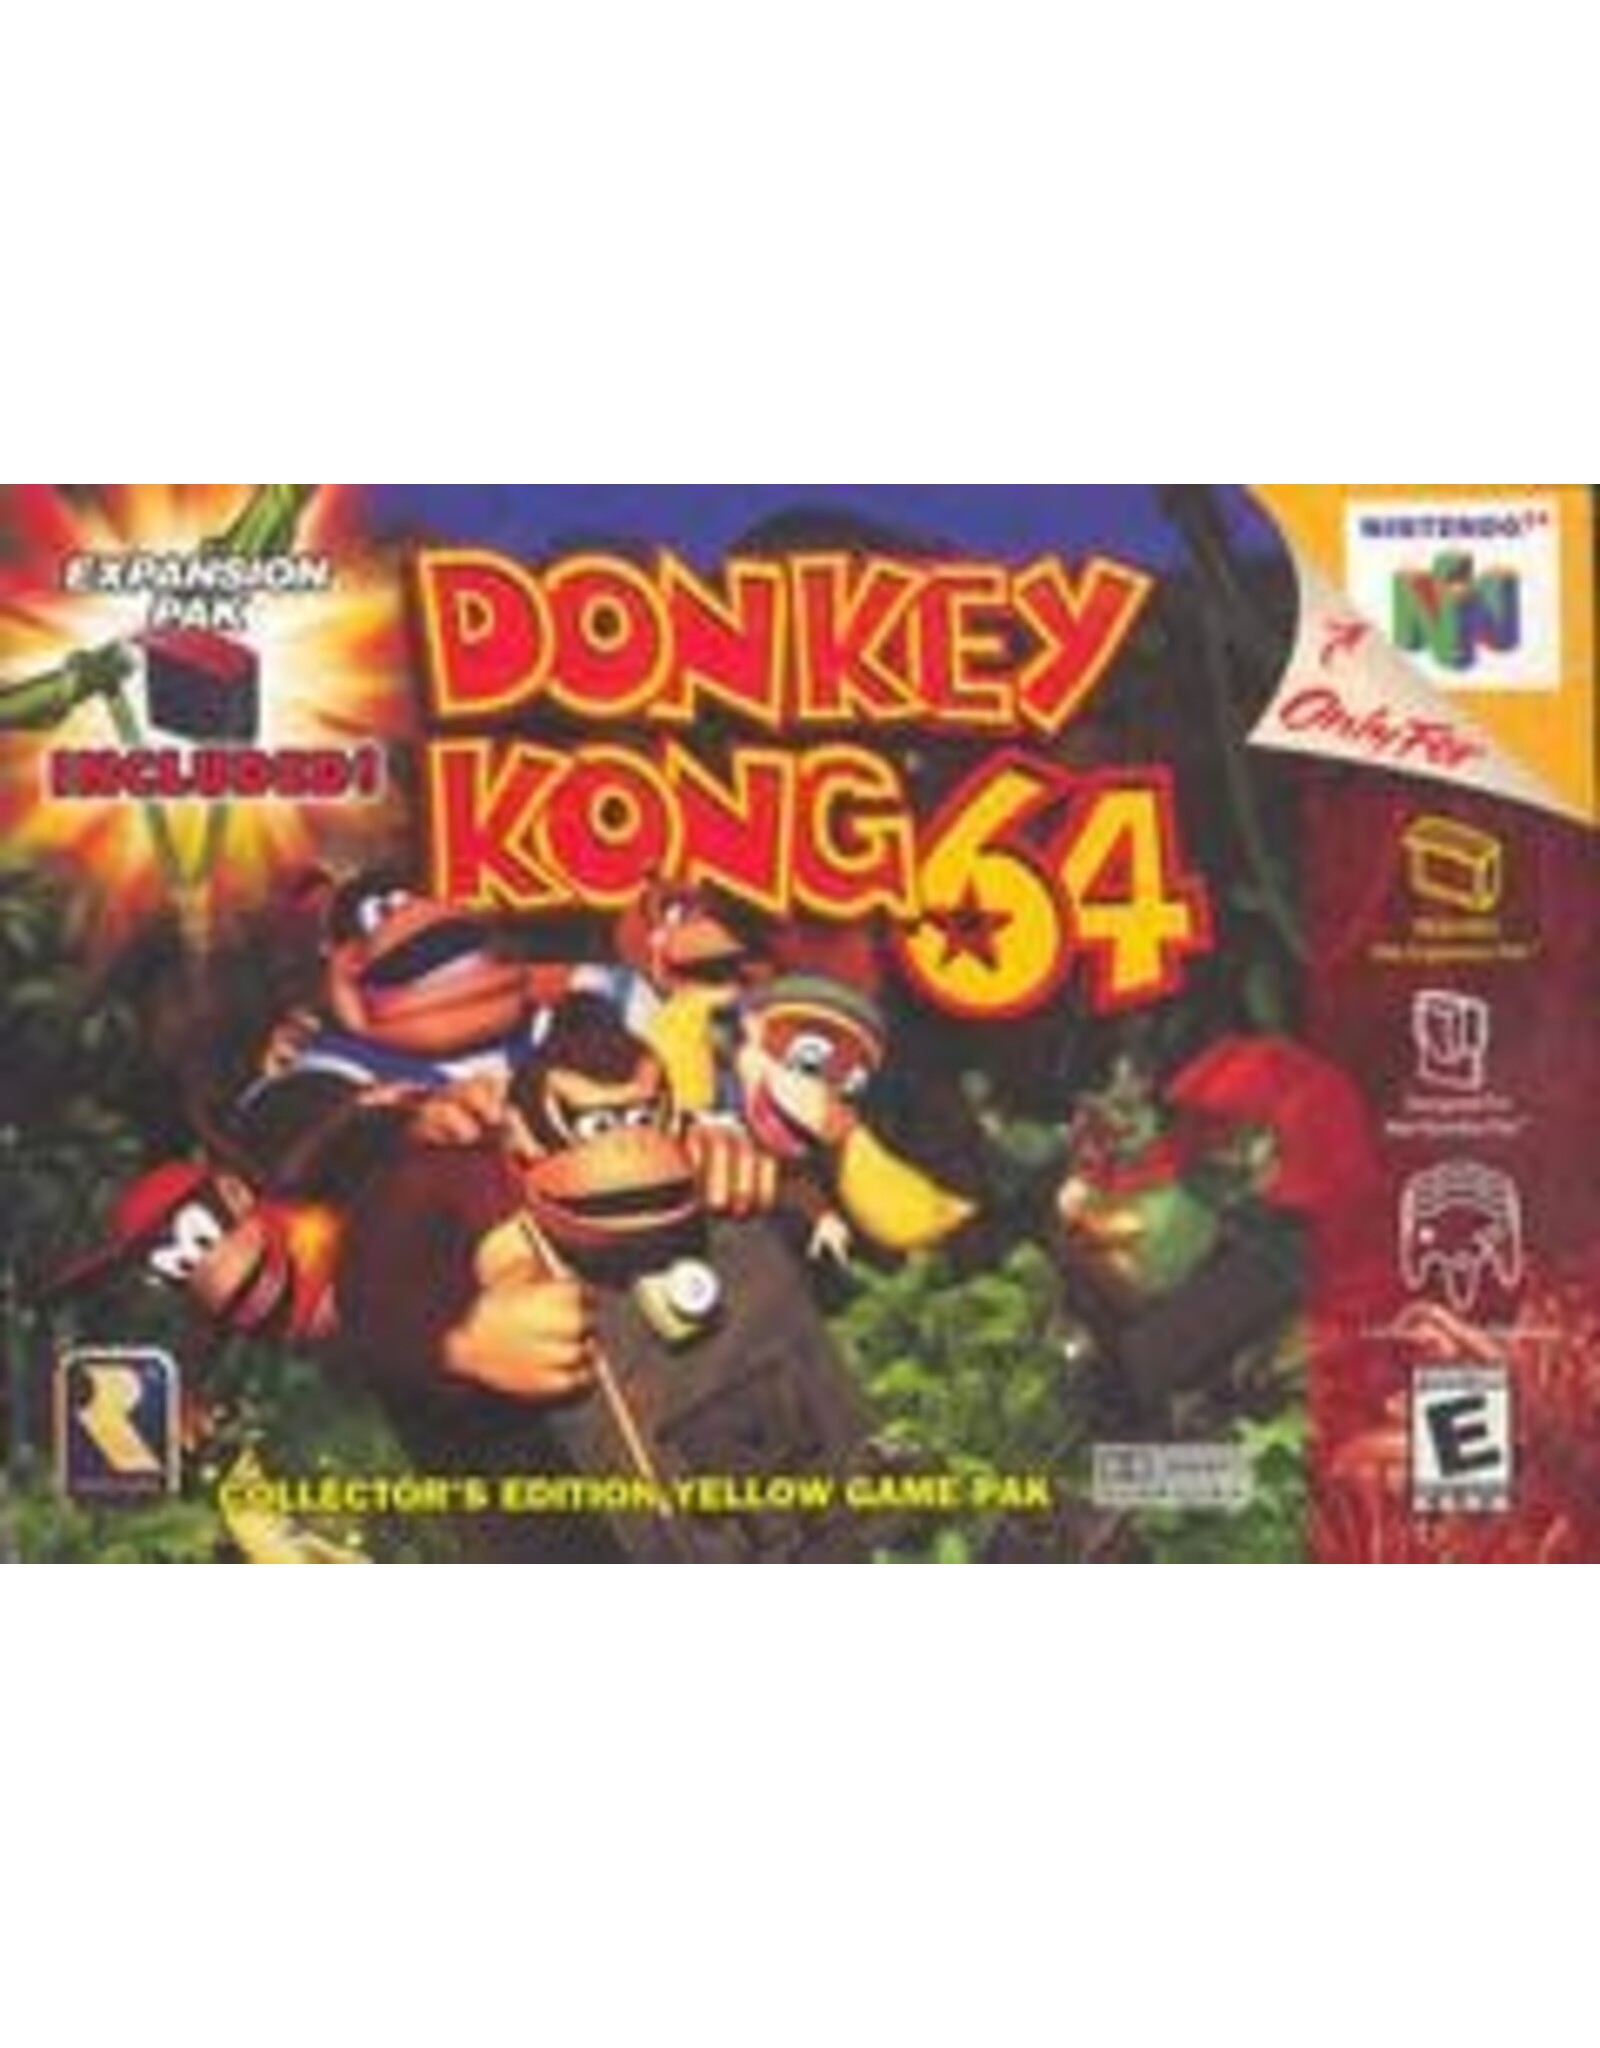 Nintendo Used Game - N64 - Donkey Kong 64 [Cart Only]